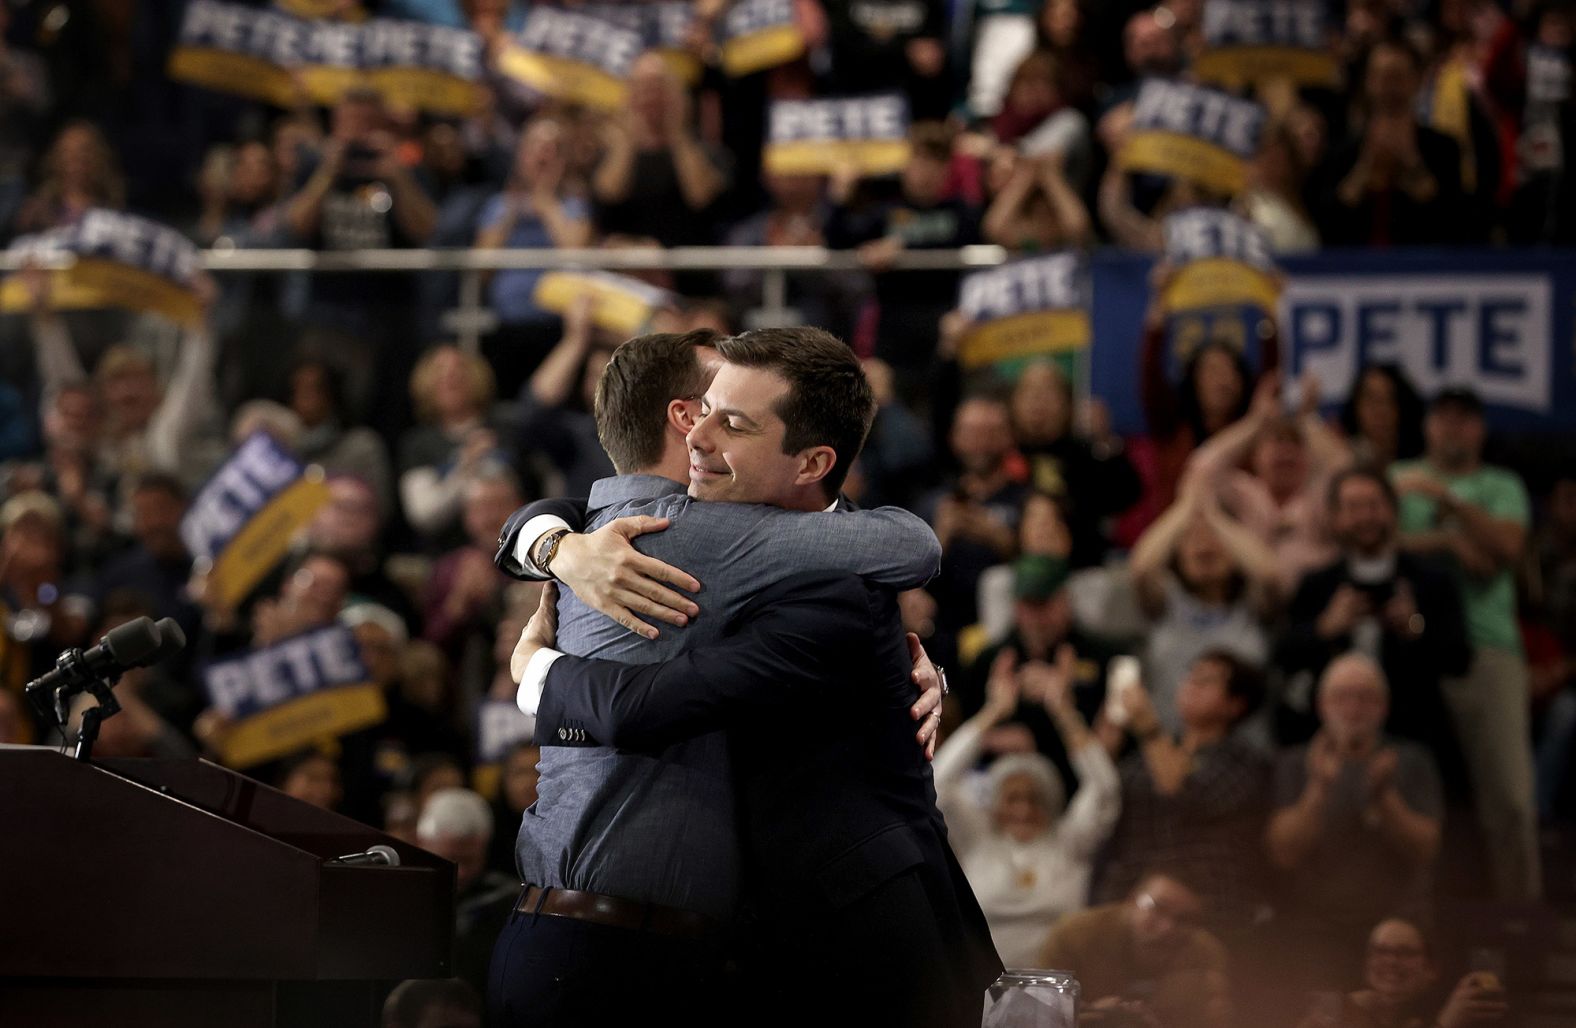 Pete Buttigieg, the former mayor of South Bend, Indiana, hugs his husband, Chasten, at a rally in Raleigh, North Carolina, on Saturday night.